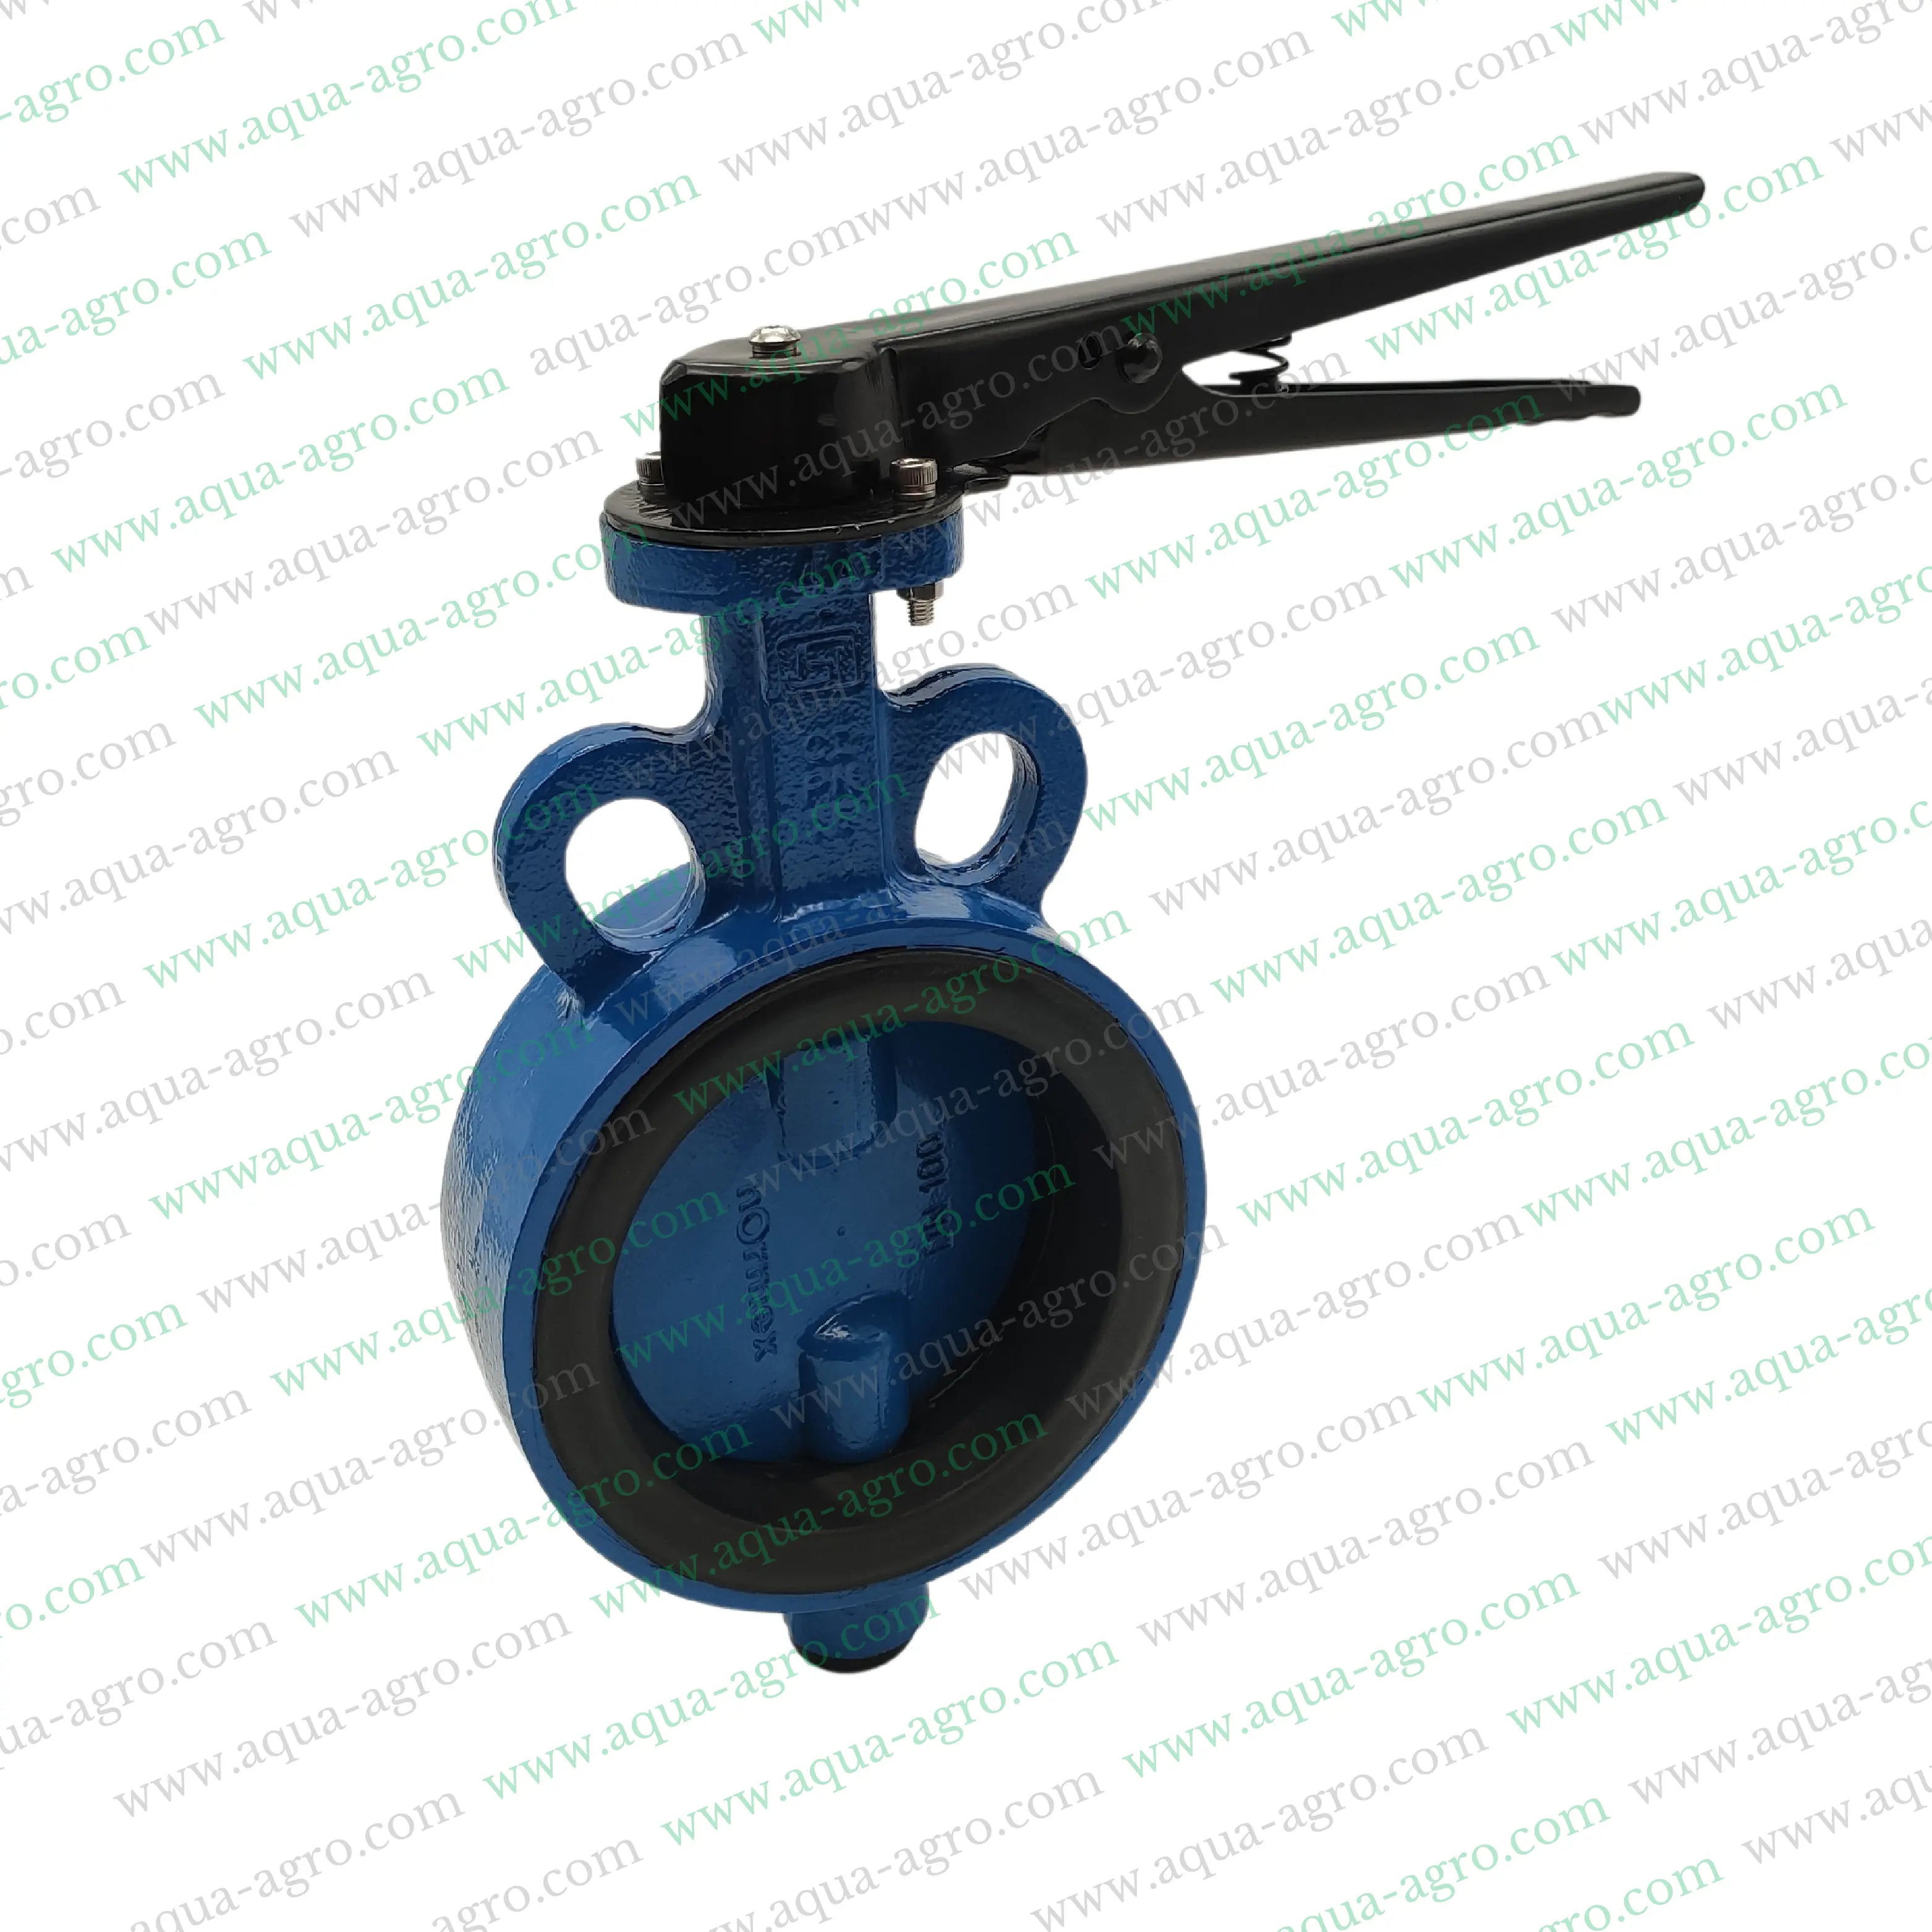 NORMEX | Valves - Butterfly Valves - Metal - C.I Body with SG Metal disc - 4" (100mm)